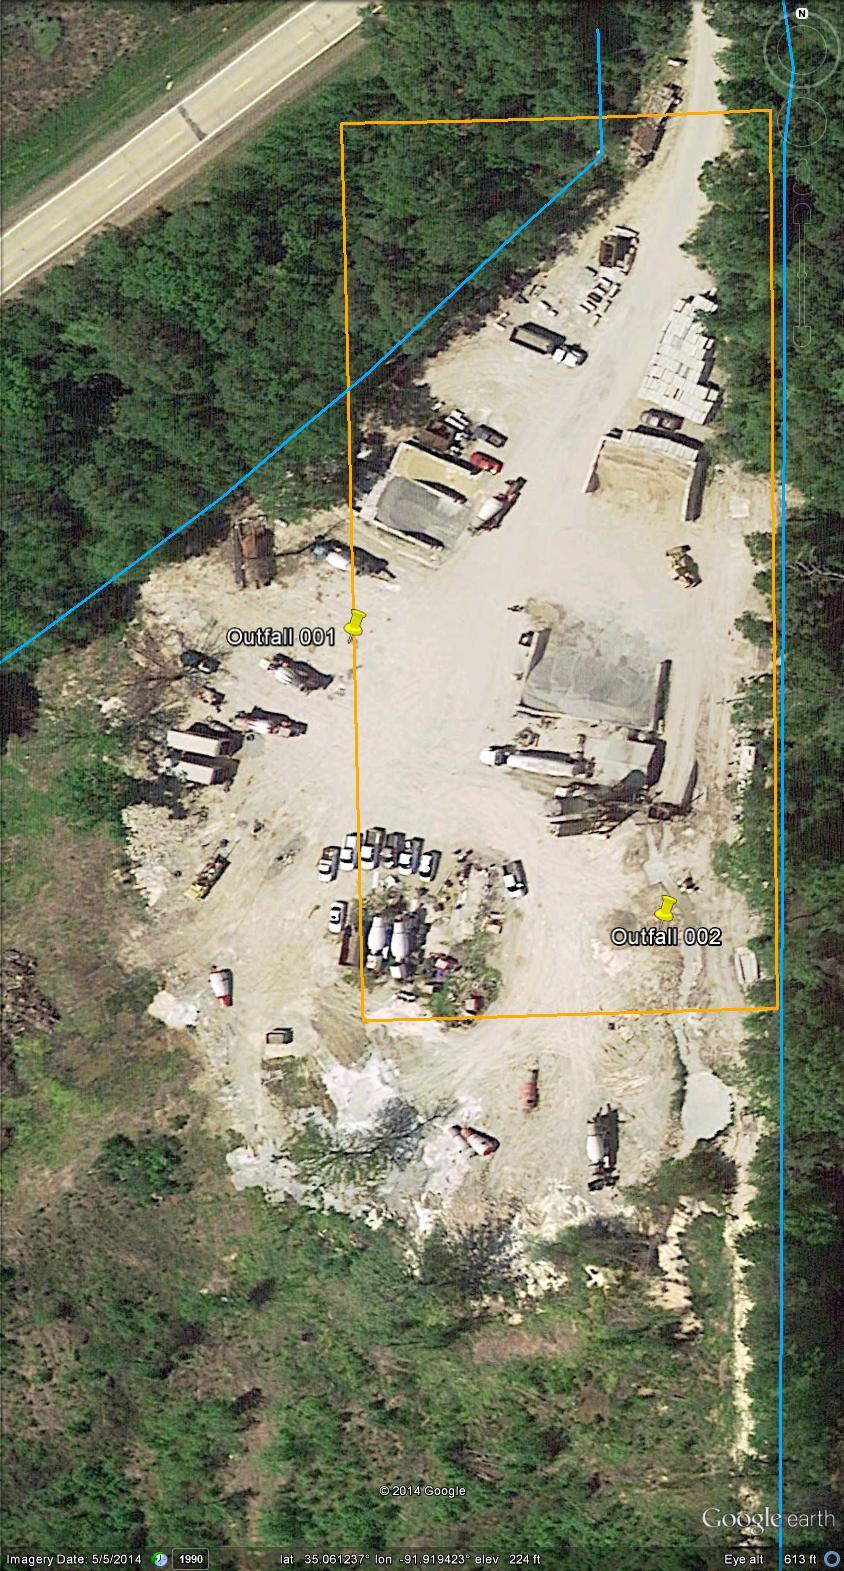 Inspection Report: Browning Redi-Mix, AFIN: 73-01185, Permit #: ARR000923 Google Earth image of the area with the two ditches that border the property outlined in blue, the permitted coordinates of